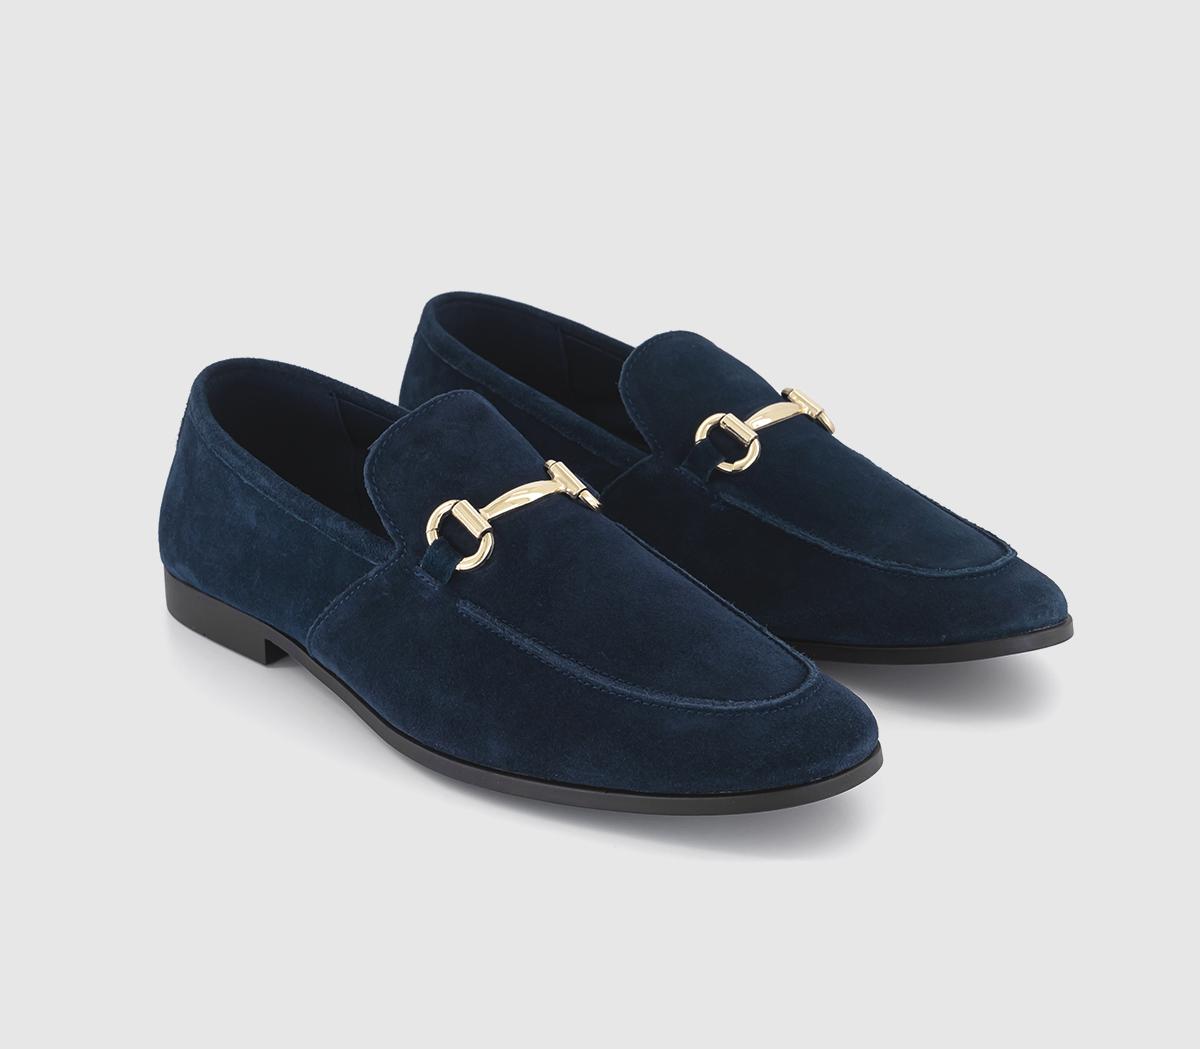 OFFICE Mens Memming Loafers Navy Suede, 10